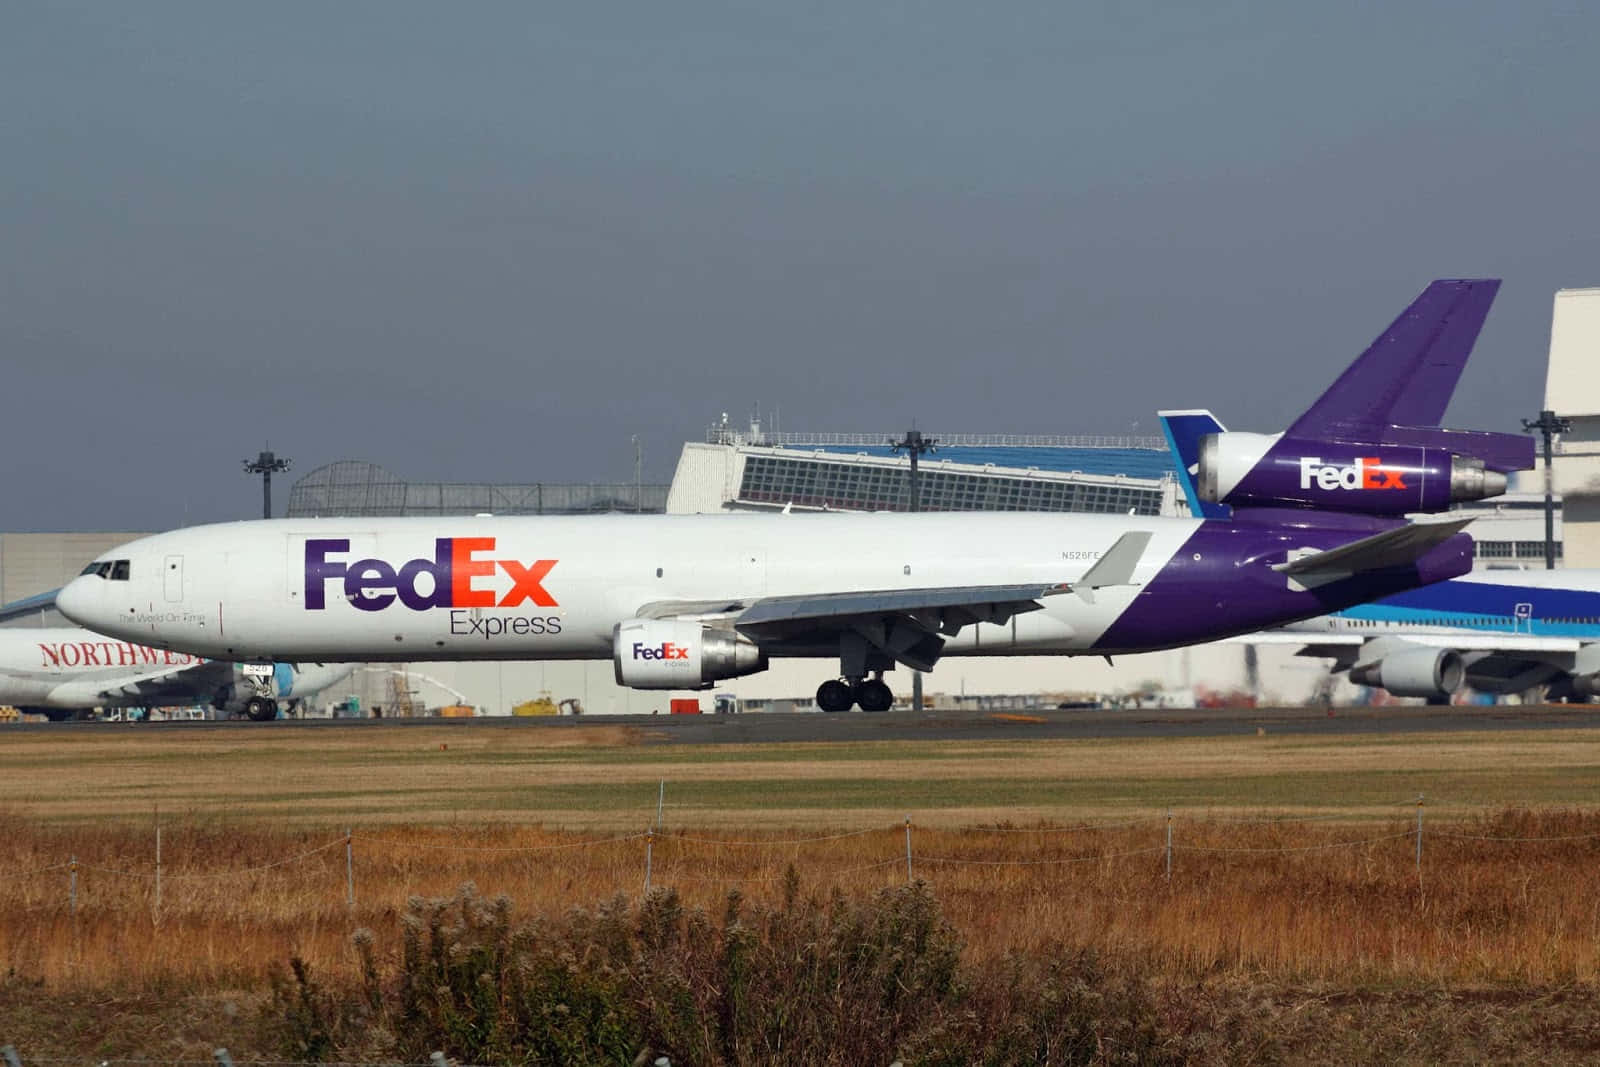 Get packages delivered on time with FedEx.